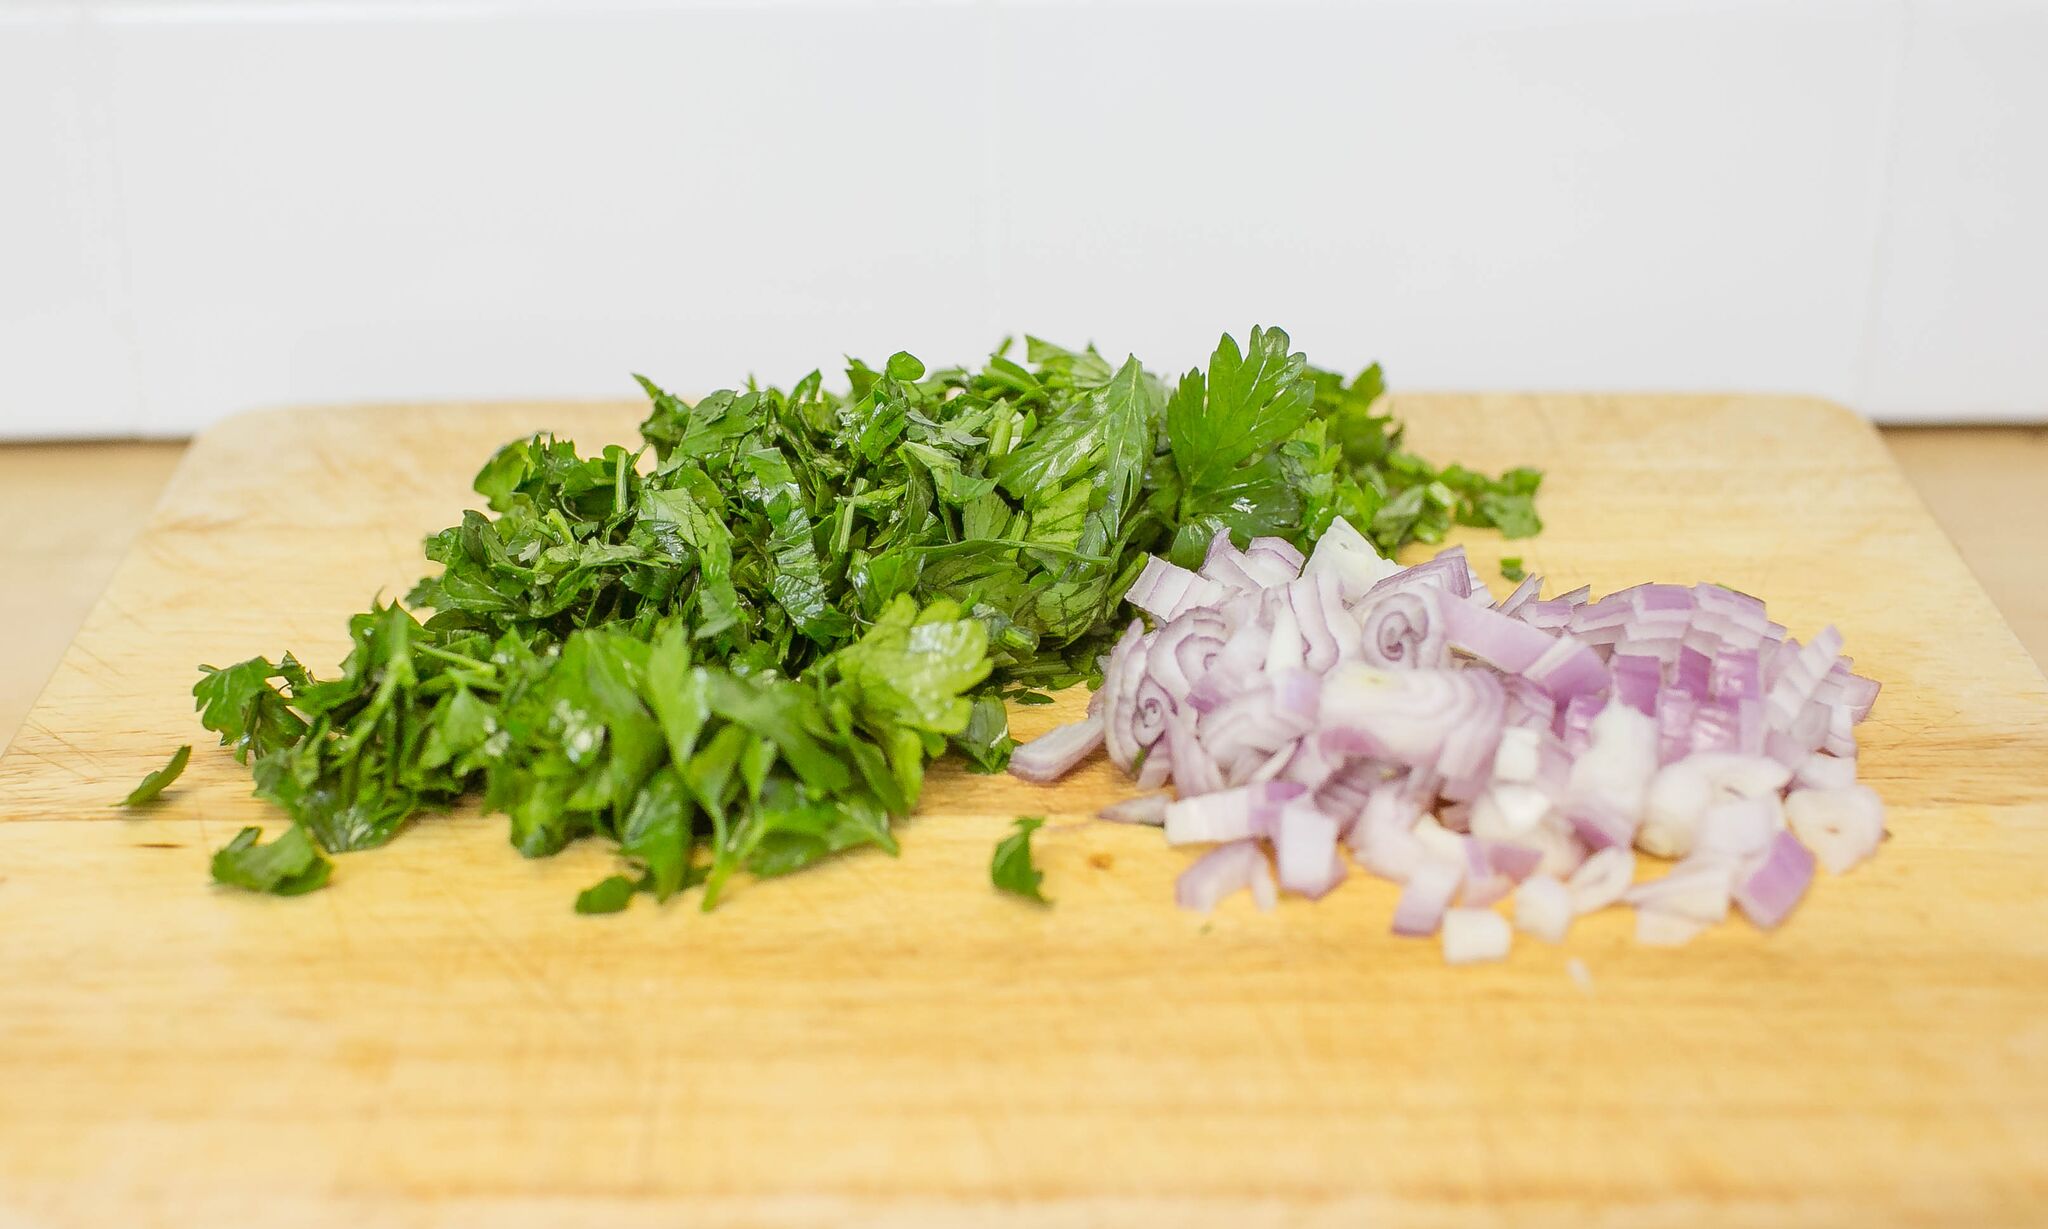 Chop half the parsley and shallot and set aside.